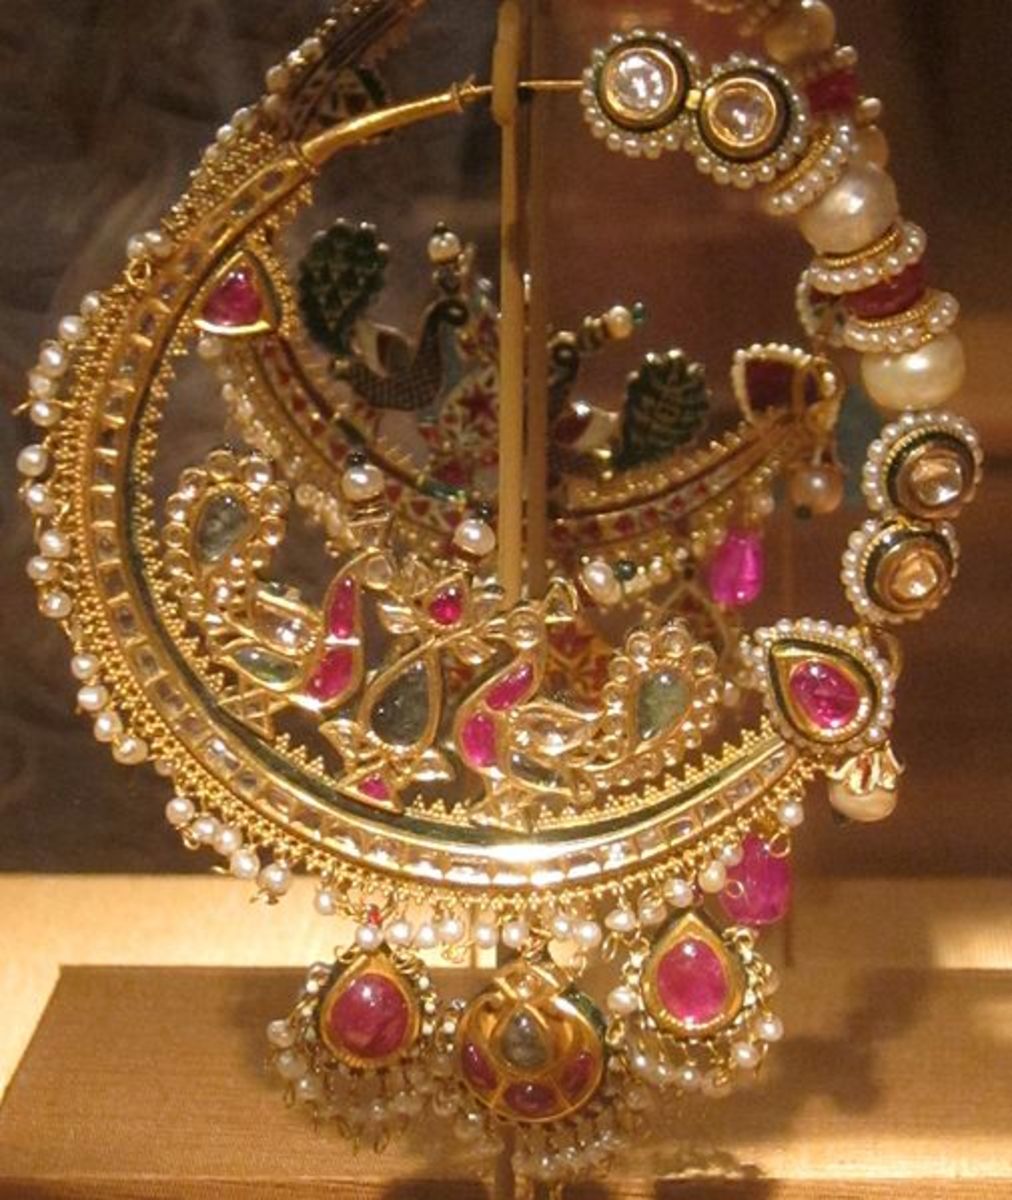 Mughal nose-ring crafted out of gold and studded with various precious gemstones